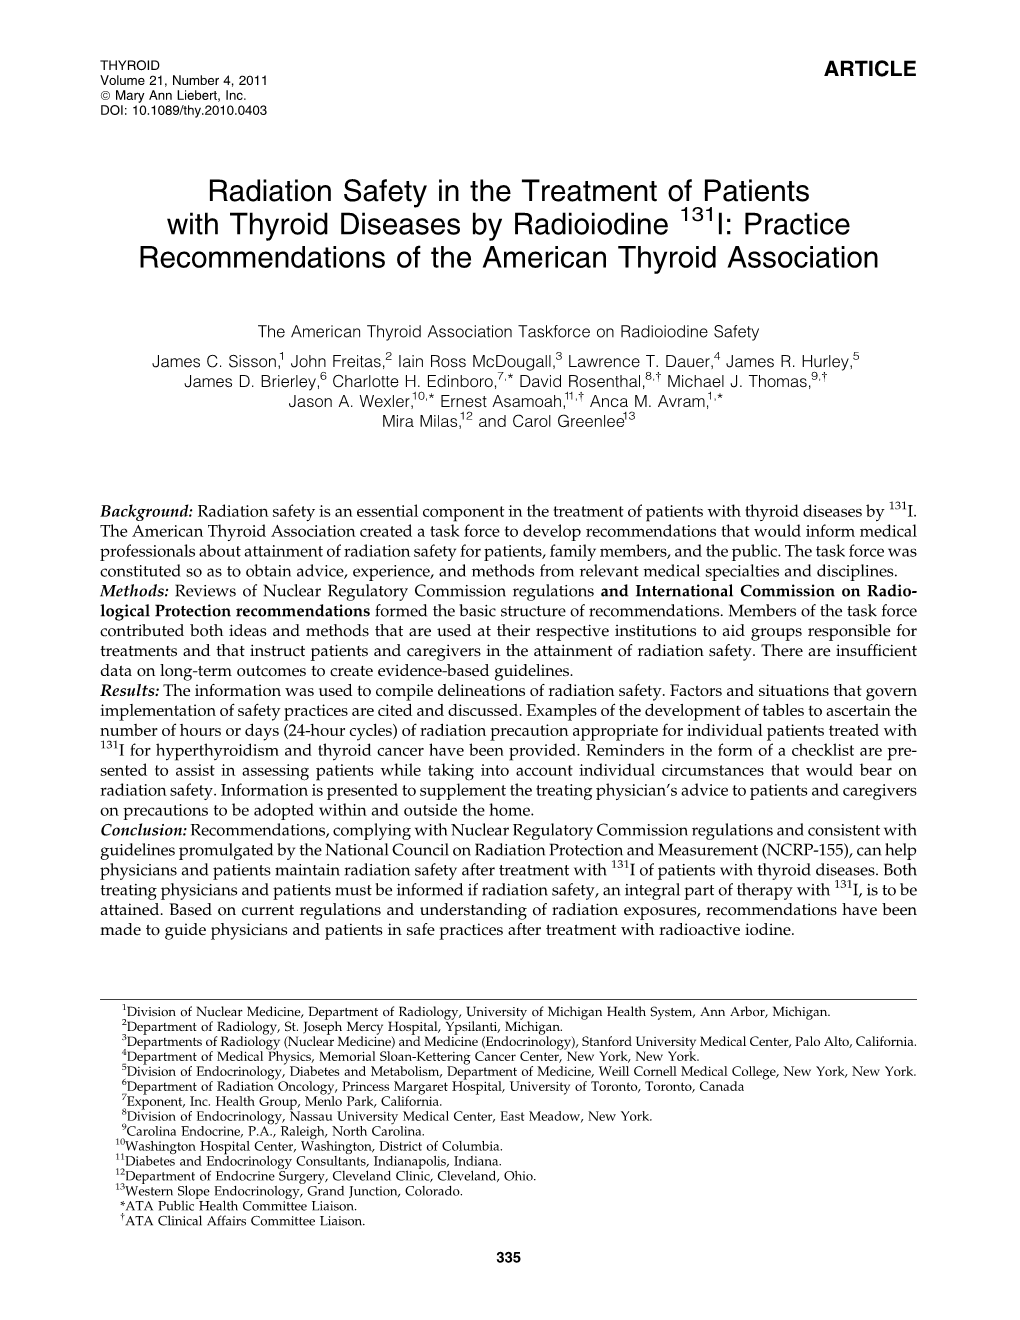 ATA Recommendations on Radiation Safety After